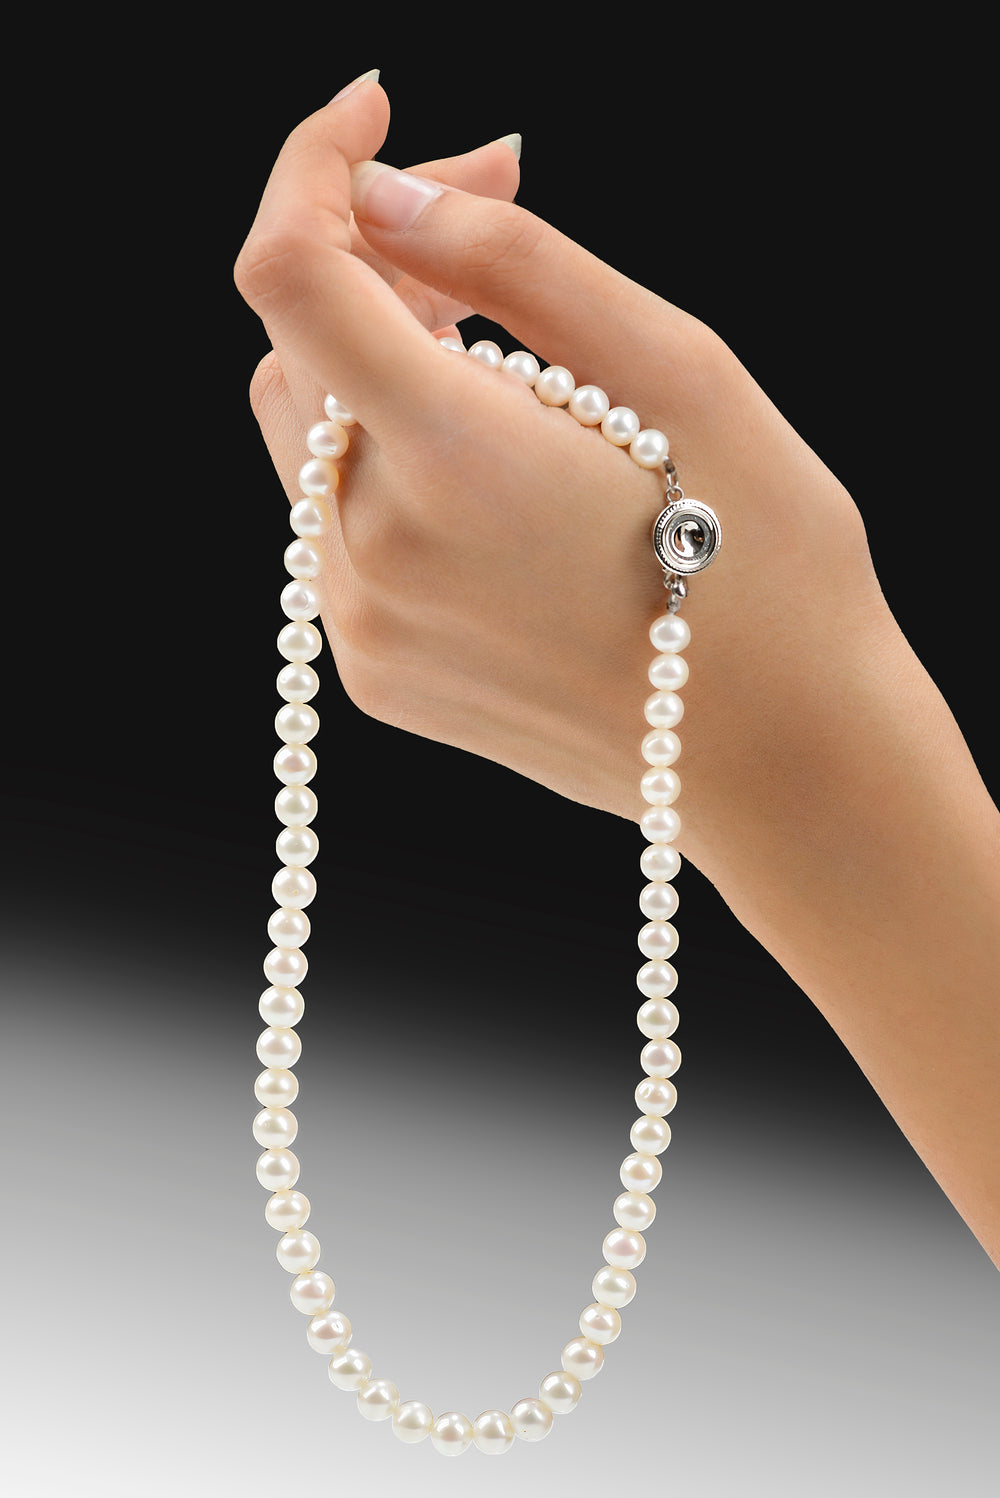 Model hand gracefully holds a string of white pearls with a silver clasp against a black background, perfect gift extract from the nature